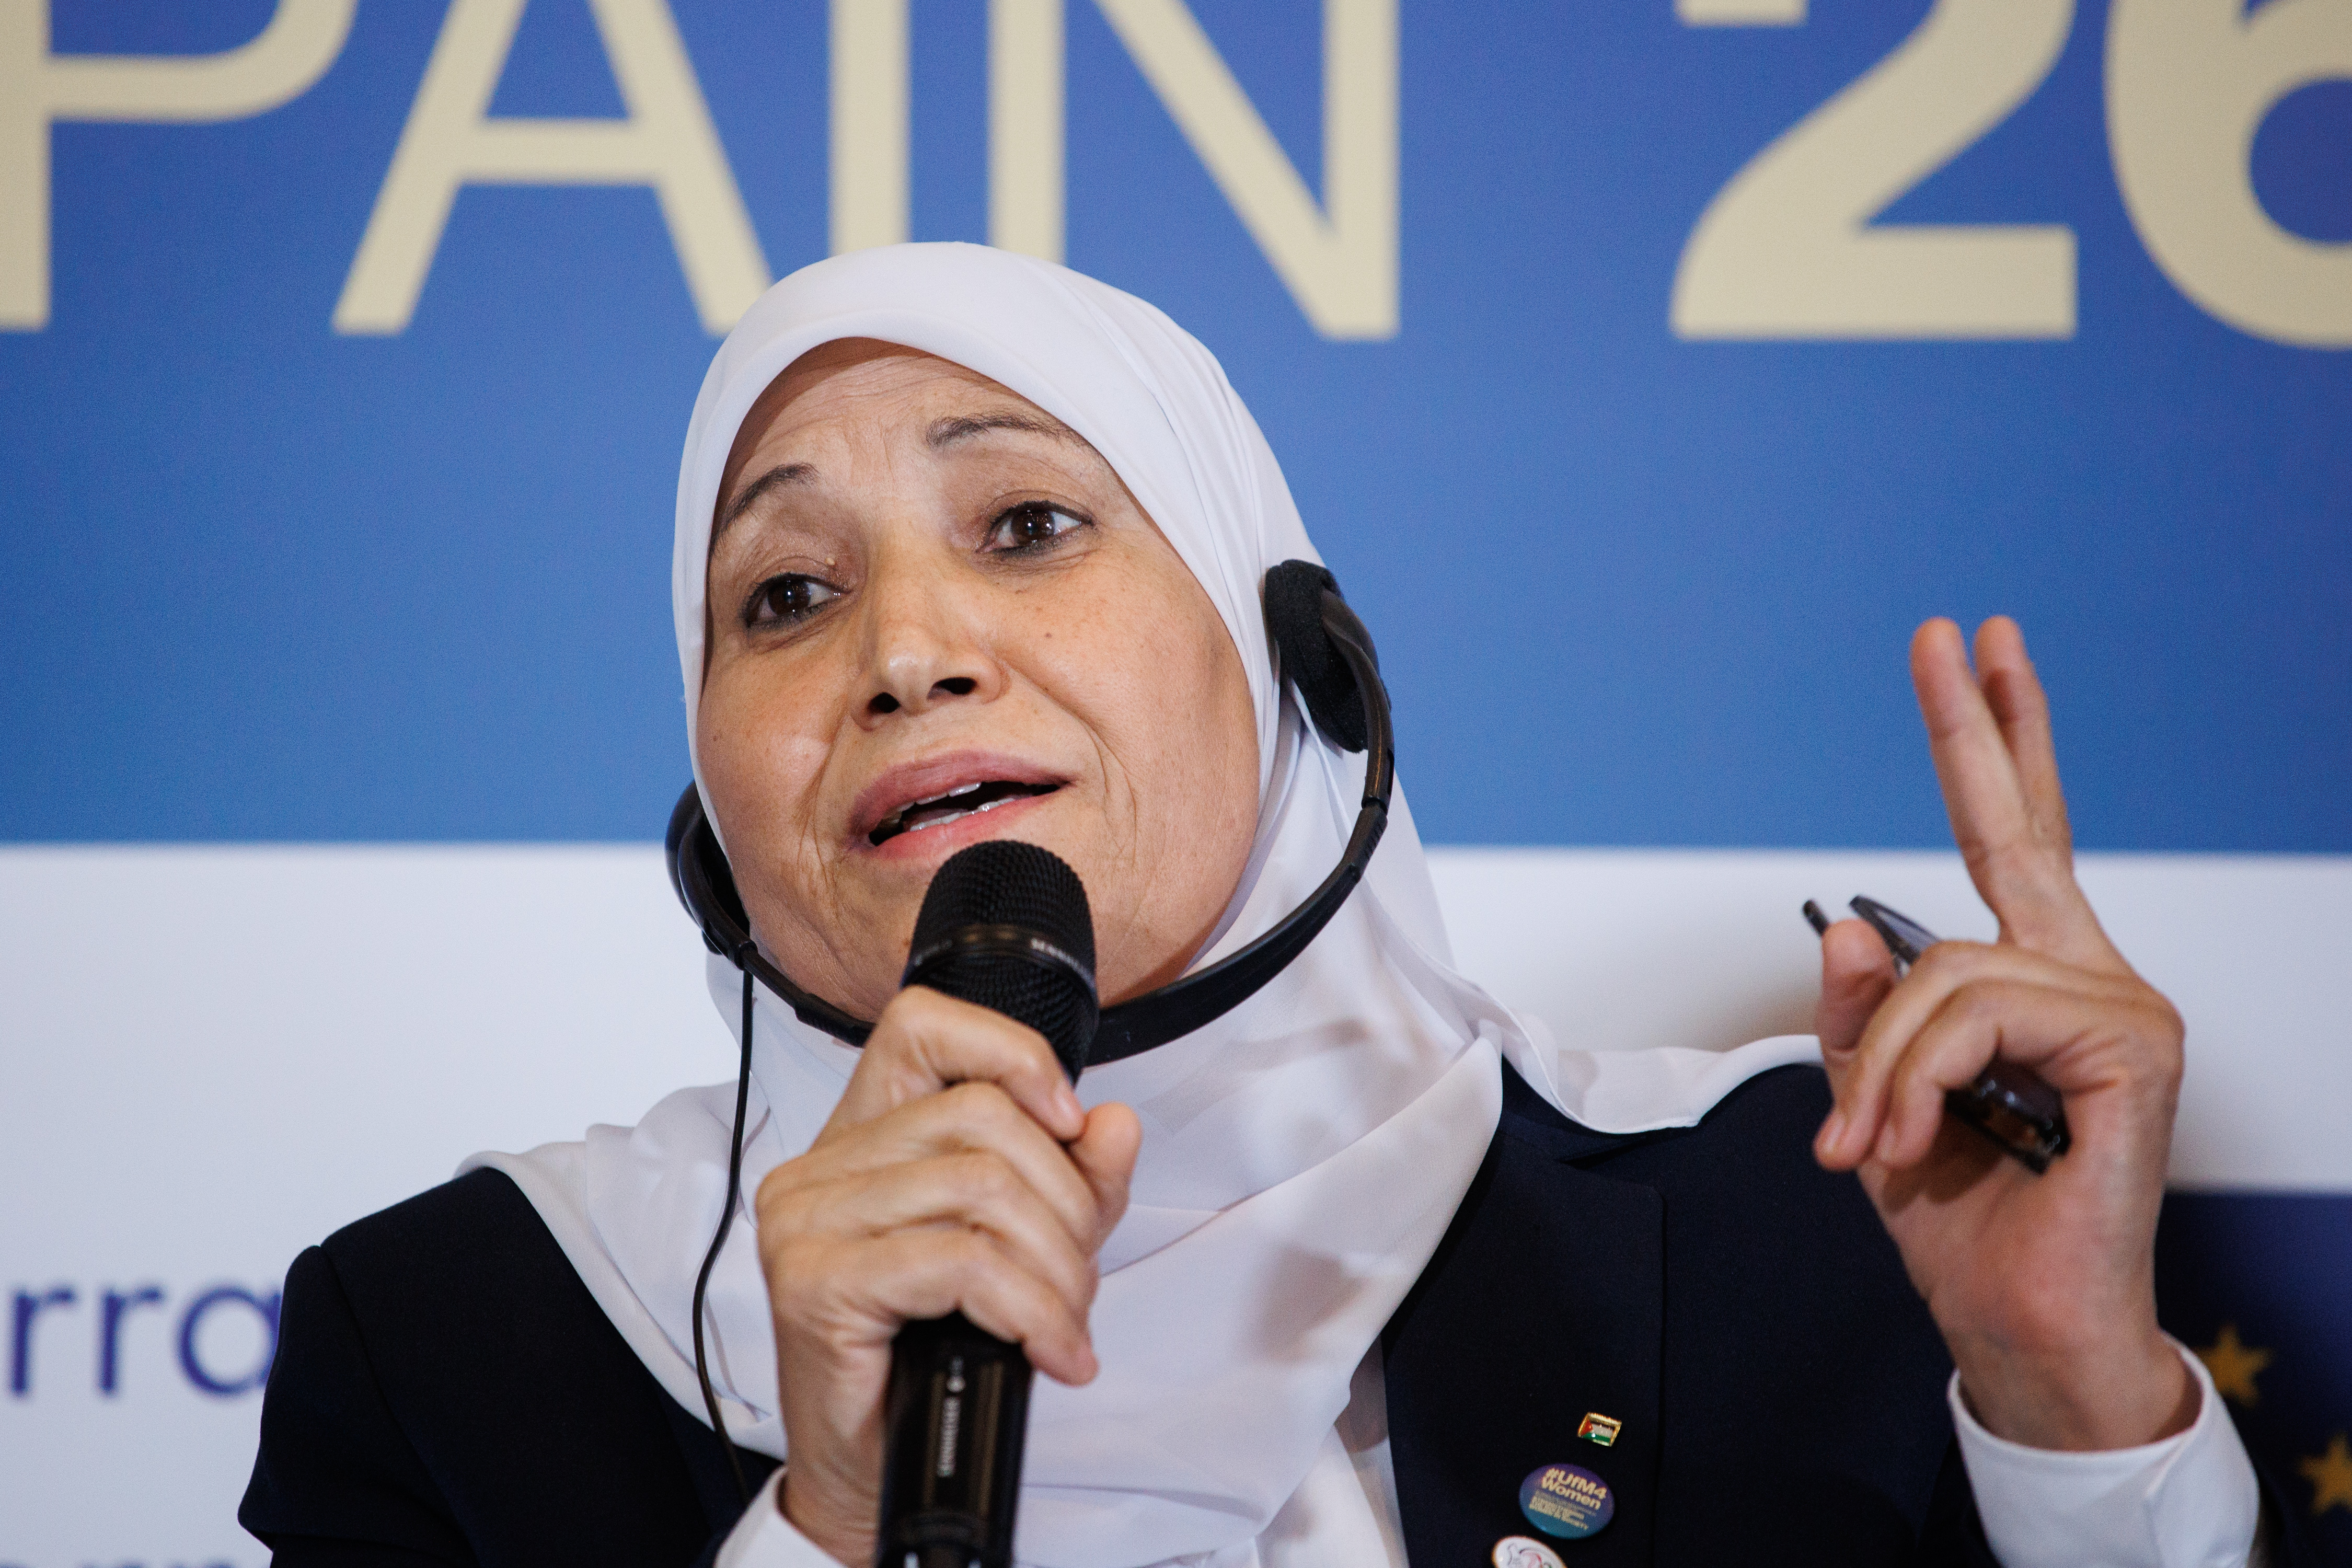 Palestinian Minister of Women’s Affairs Amal Nashwan speaks during the Euro-Mediterranean Conference organized by the Union for the Mediterranean (UfM) in Madrid, Spain on Oct. 26, 2022. Photo By Alejandro Martinez Velez/Europa Press via Getty Images.